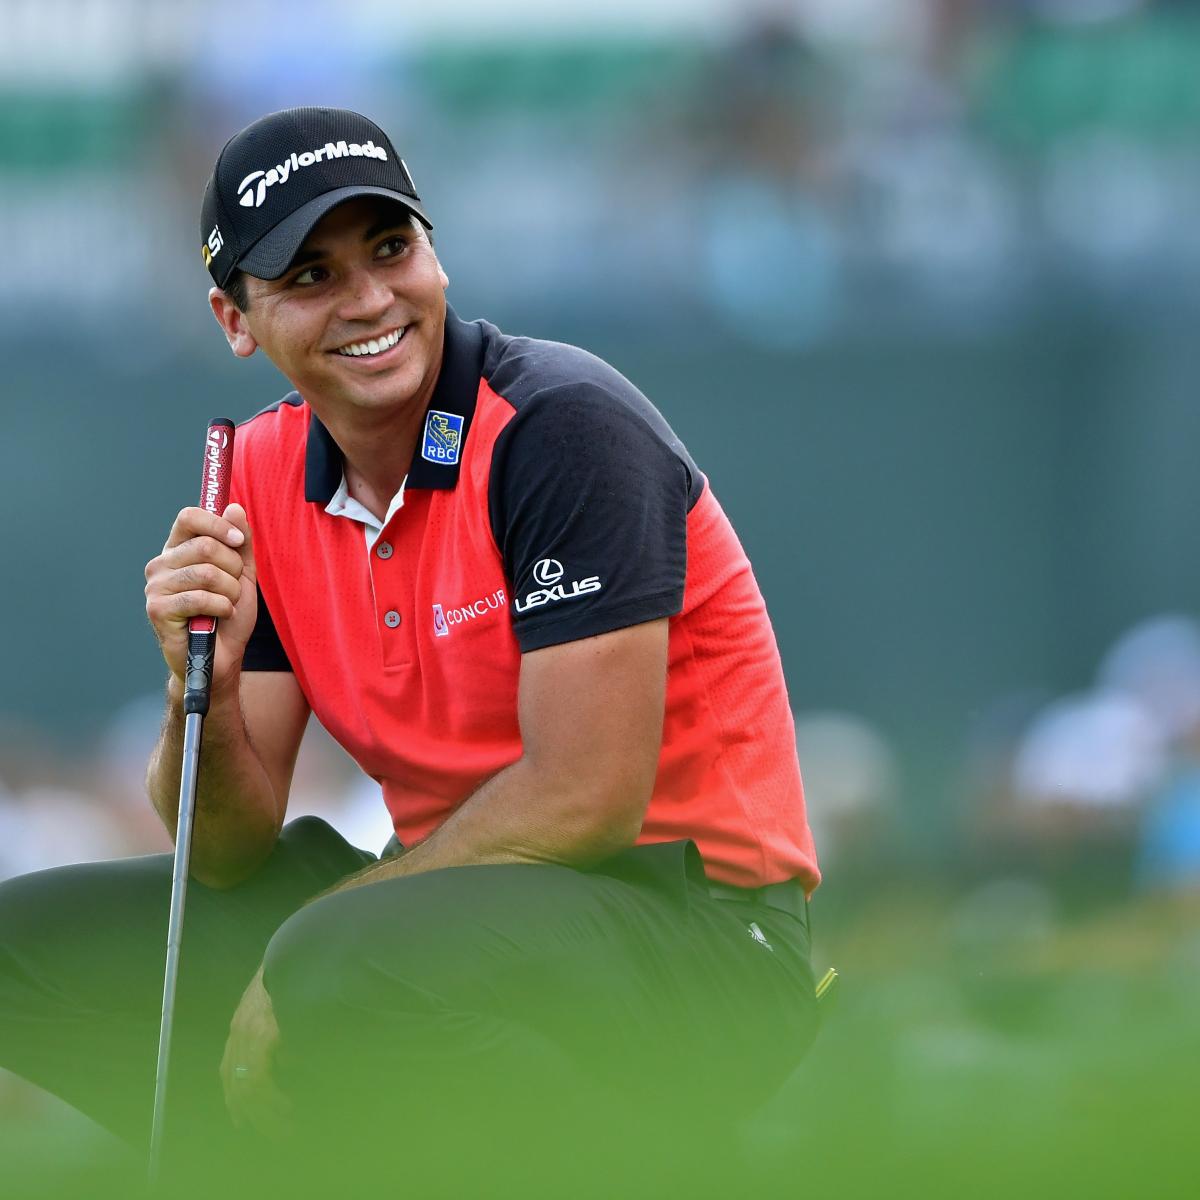 Jason Day's WhiteHot Putter Vaults Him Up Leaderboard in 2ndRound